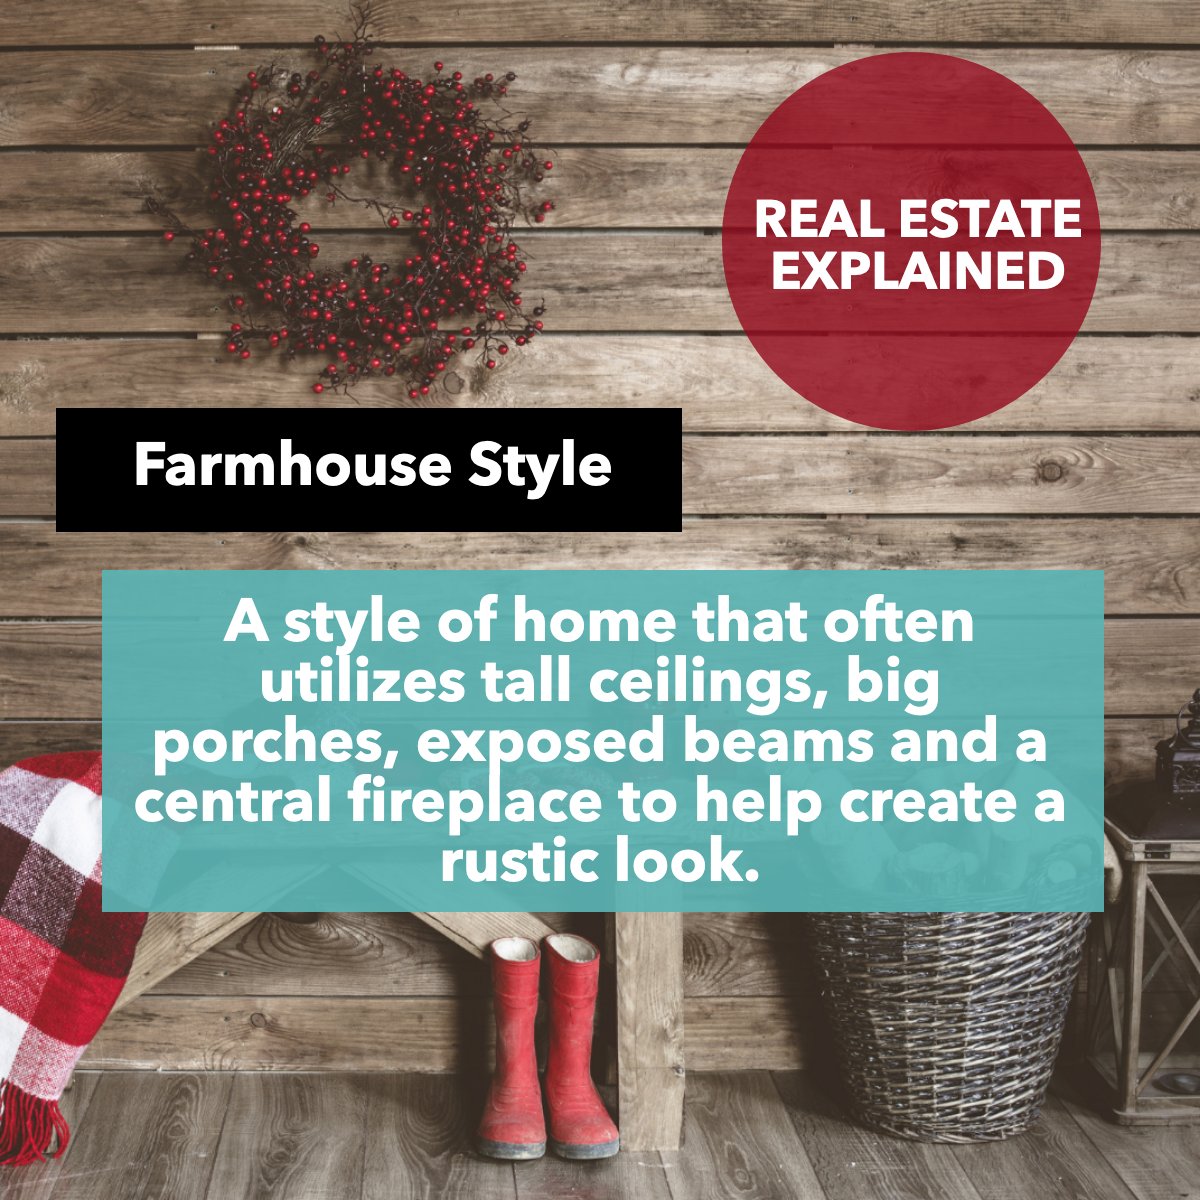 Did you know what a Farmhouse Style is? 🏡 Is this the type of house that you like? #farmhousestylehome #farmhousestyledesign #farmhousestyleinspired #farmhouseismystyle #RacingRealEstateAgent #BarrettRealEstate #StoneTreeRealEstateTeam #maricopaazrealestate